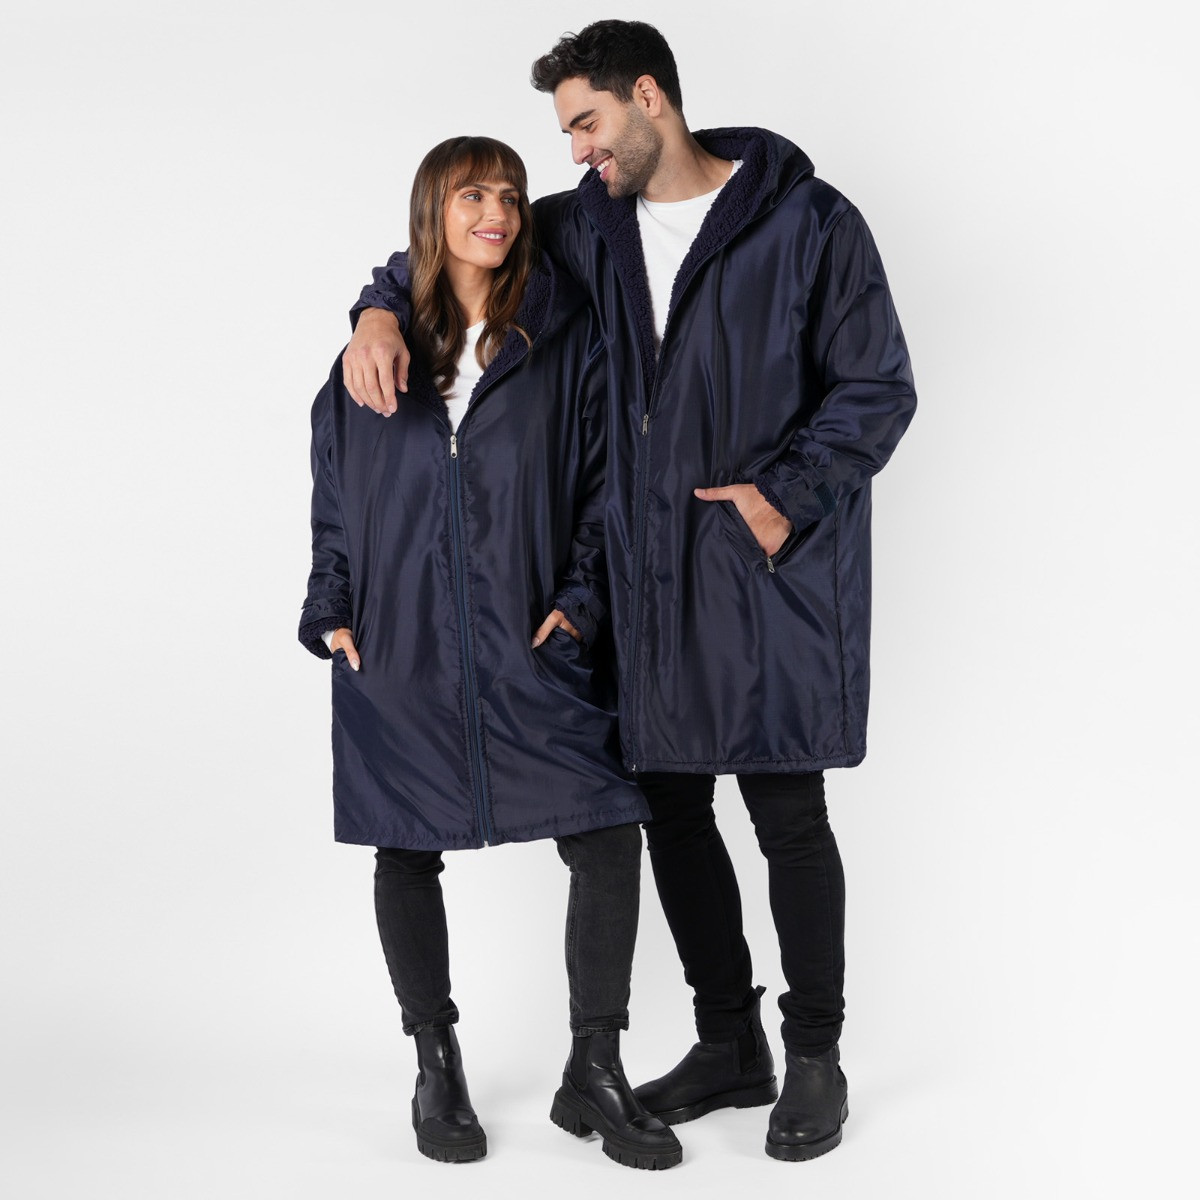 OHS Water Resistant Full Zip Changing Robe - Navy>